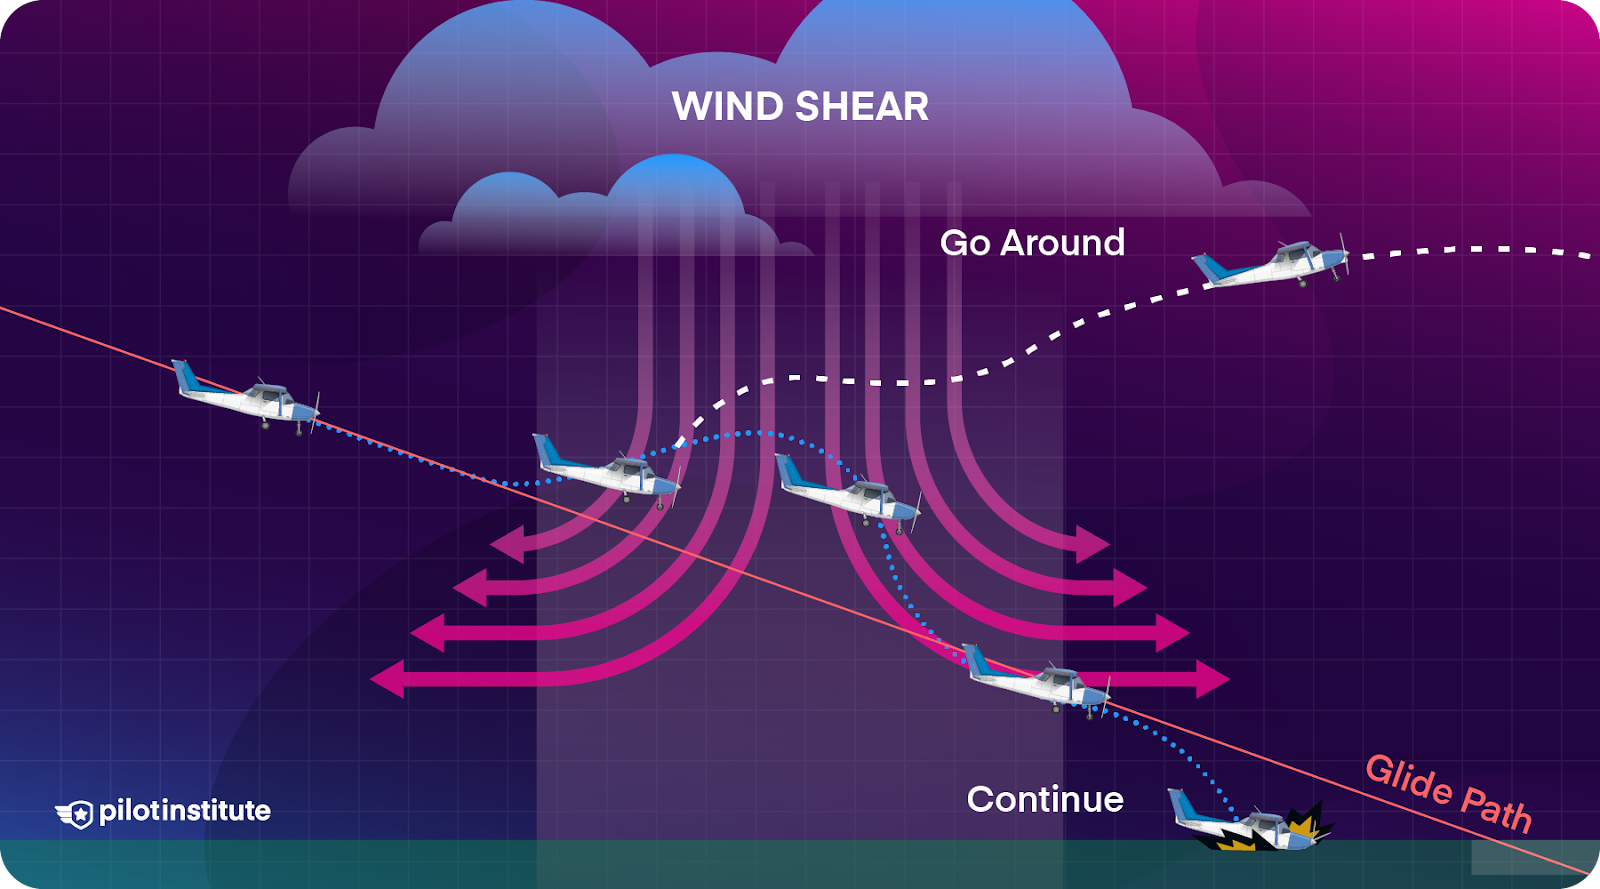 An airplane encounters serious wind shear and either performs a go-around or continues the approach and crashes.